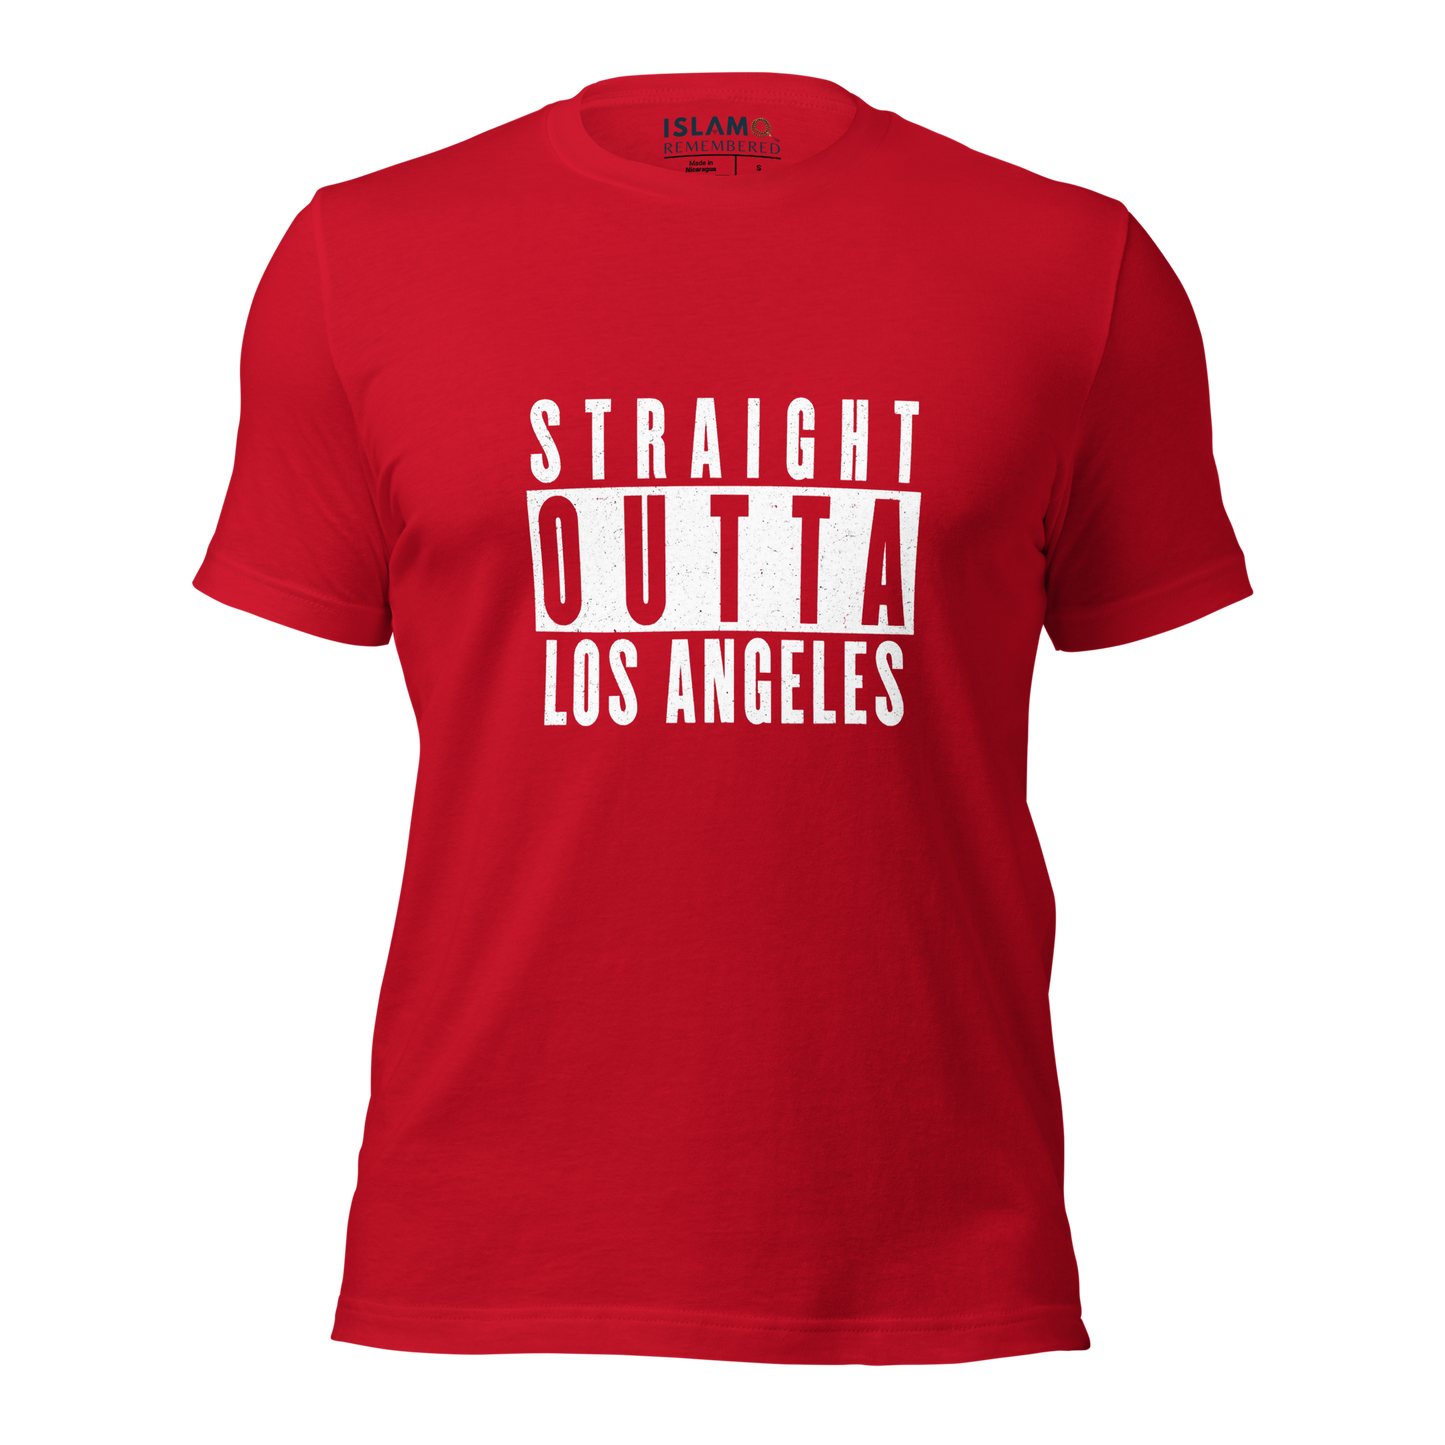 ADULT T-Shirt - STRAIGHT OUTTA LOS ANGELES